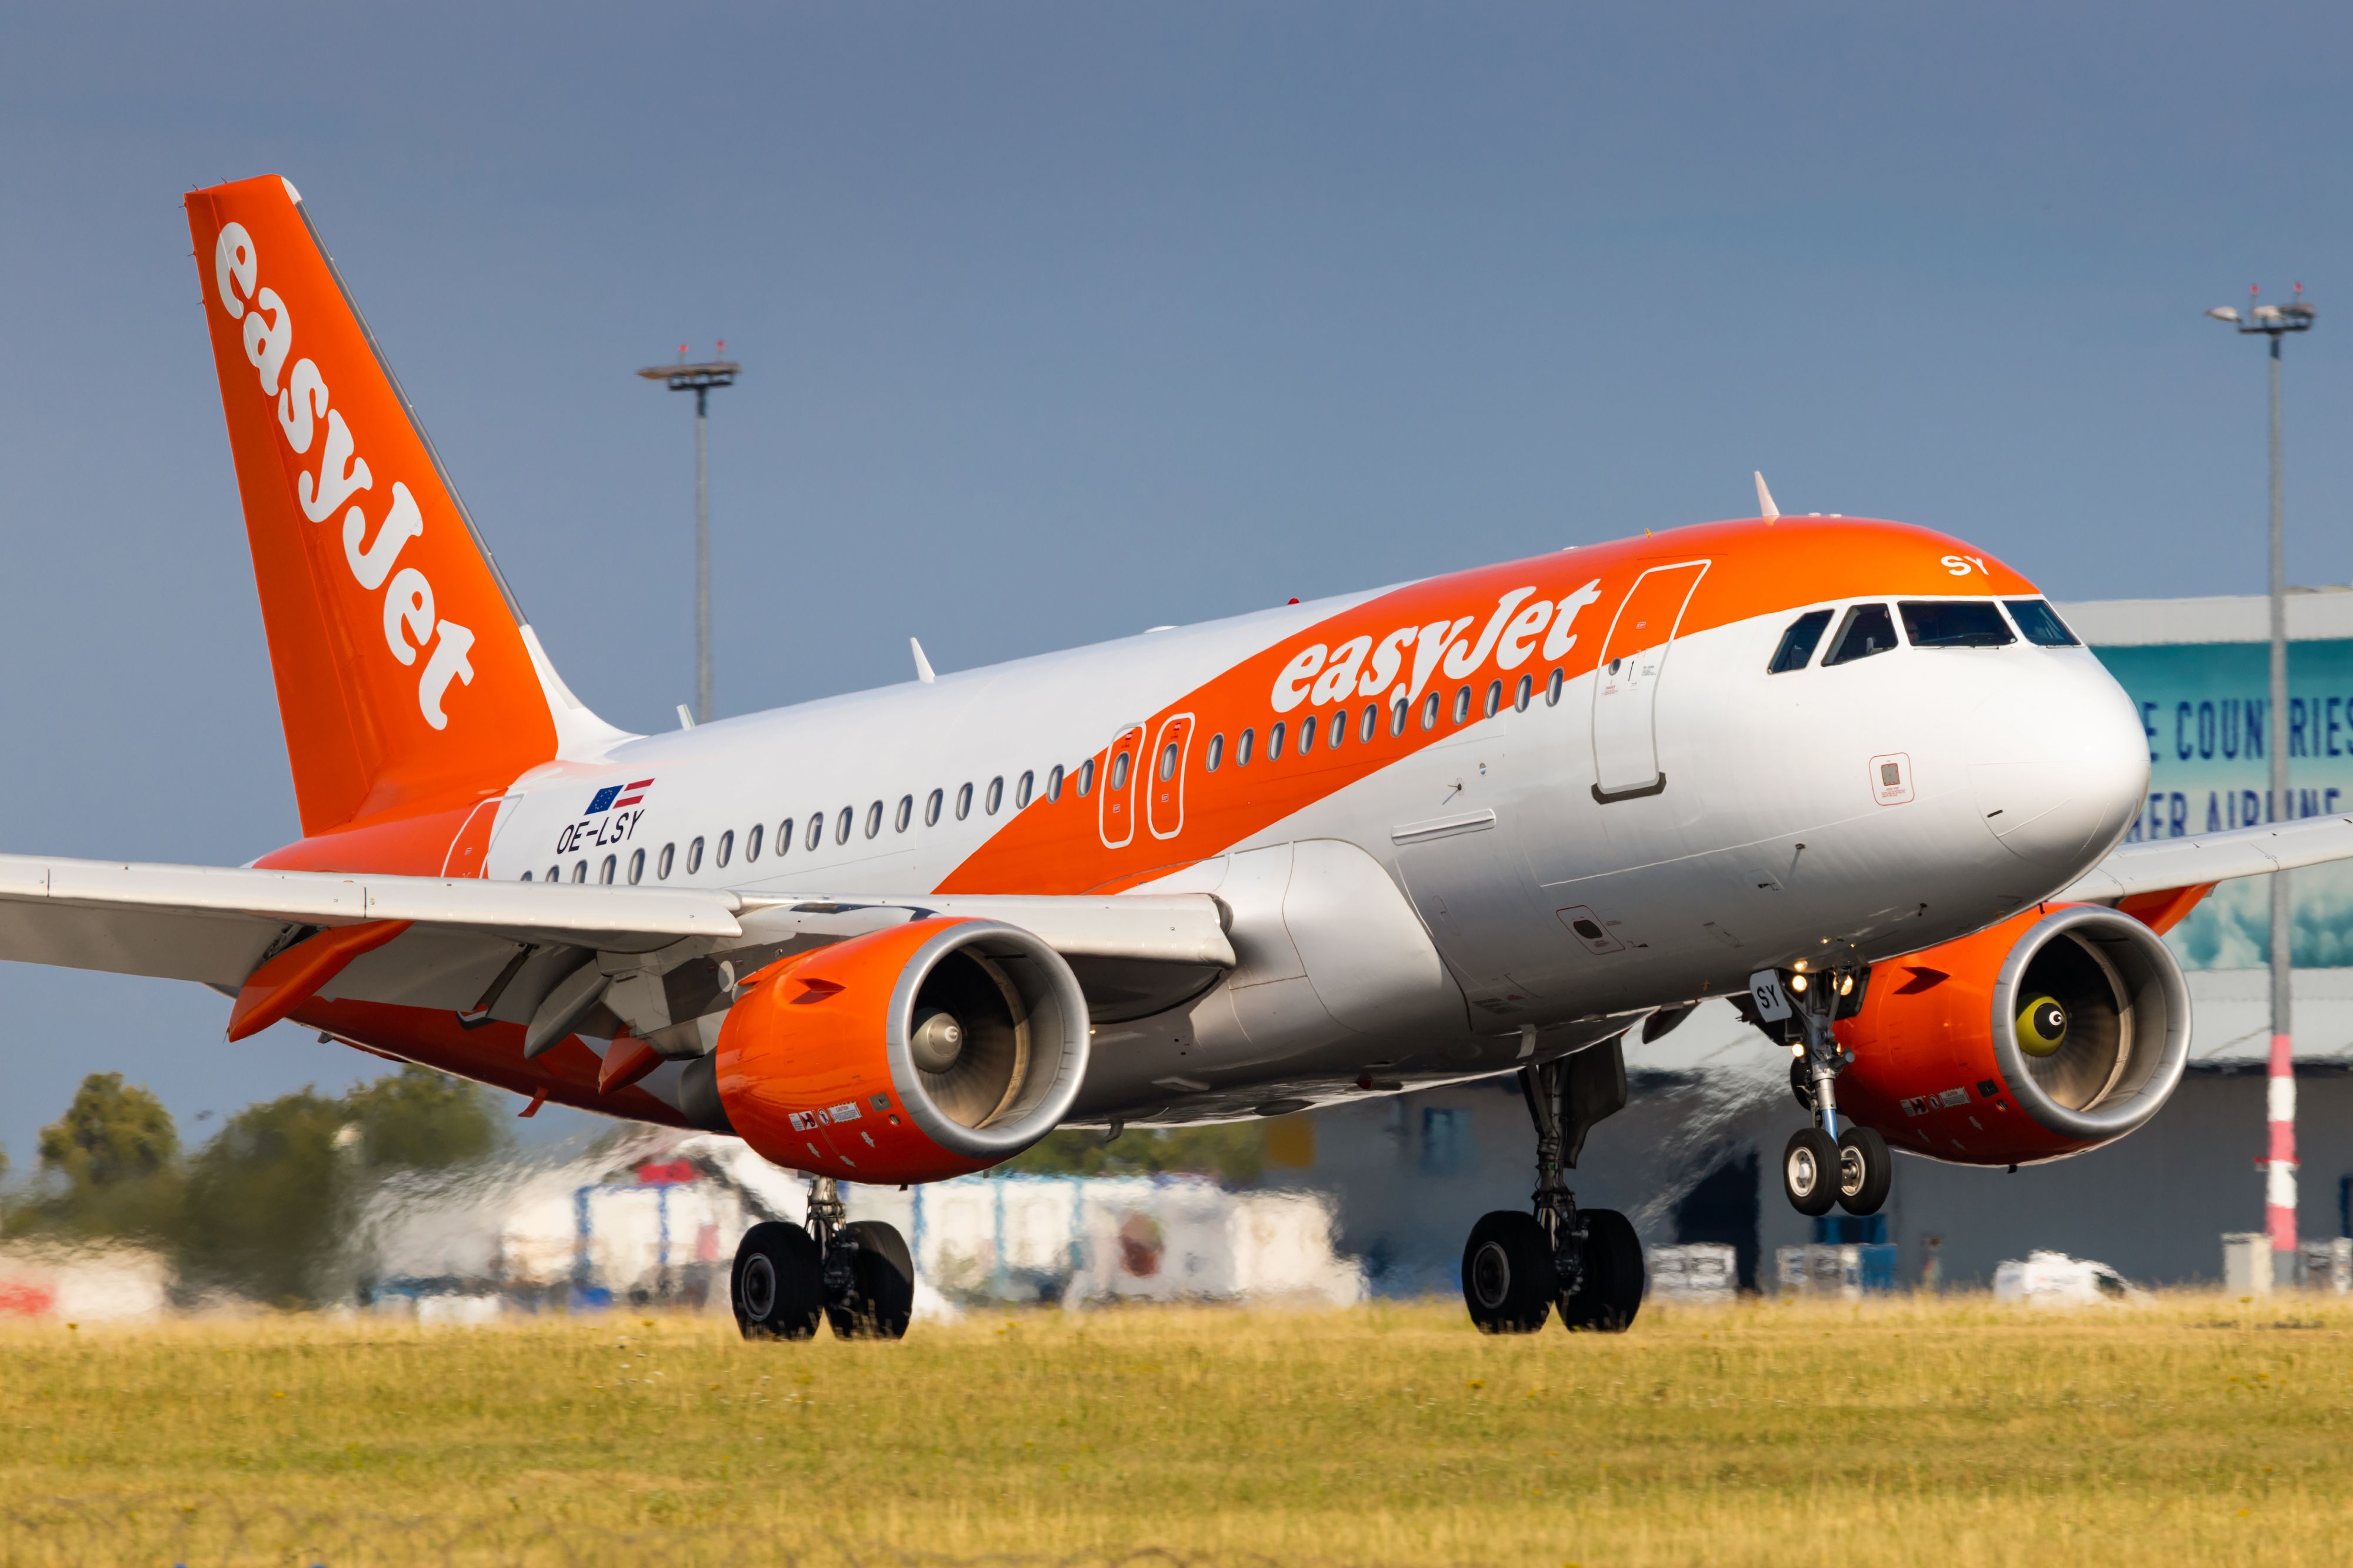 An easyJet Airbus aircraft about to take off.